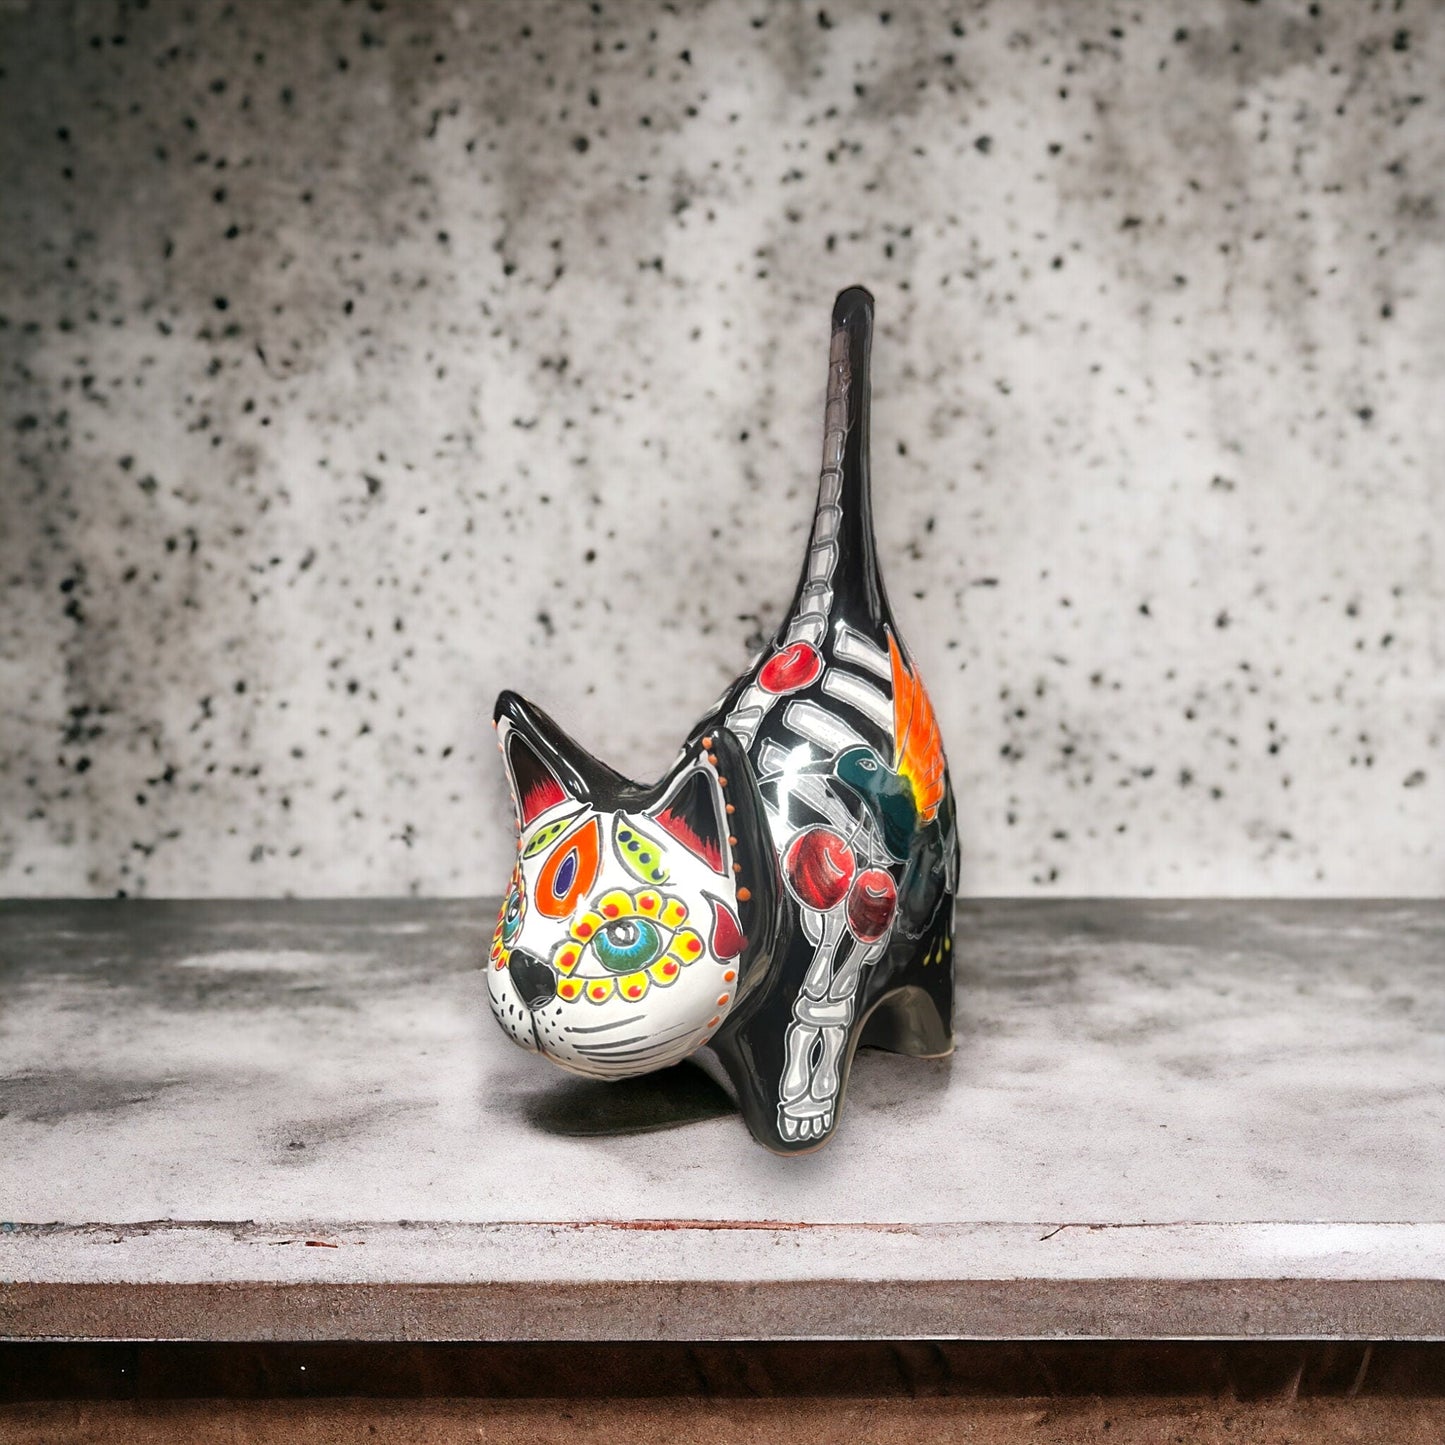 Vibrant Talavera Cat Statue | Day of the Dead Decor | Hand-Painted Mexican Art (Small)